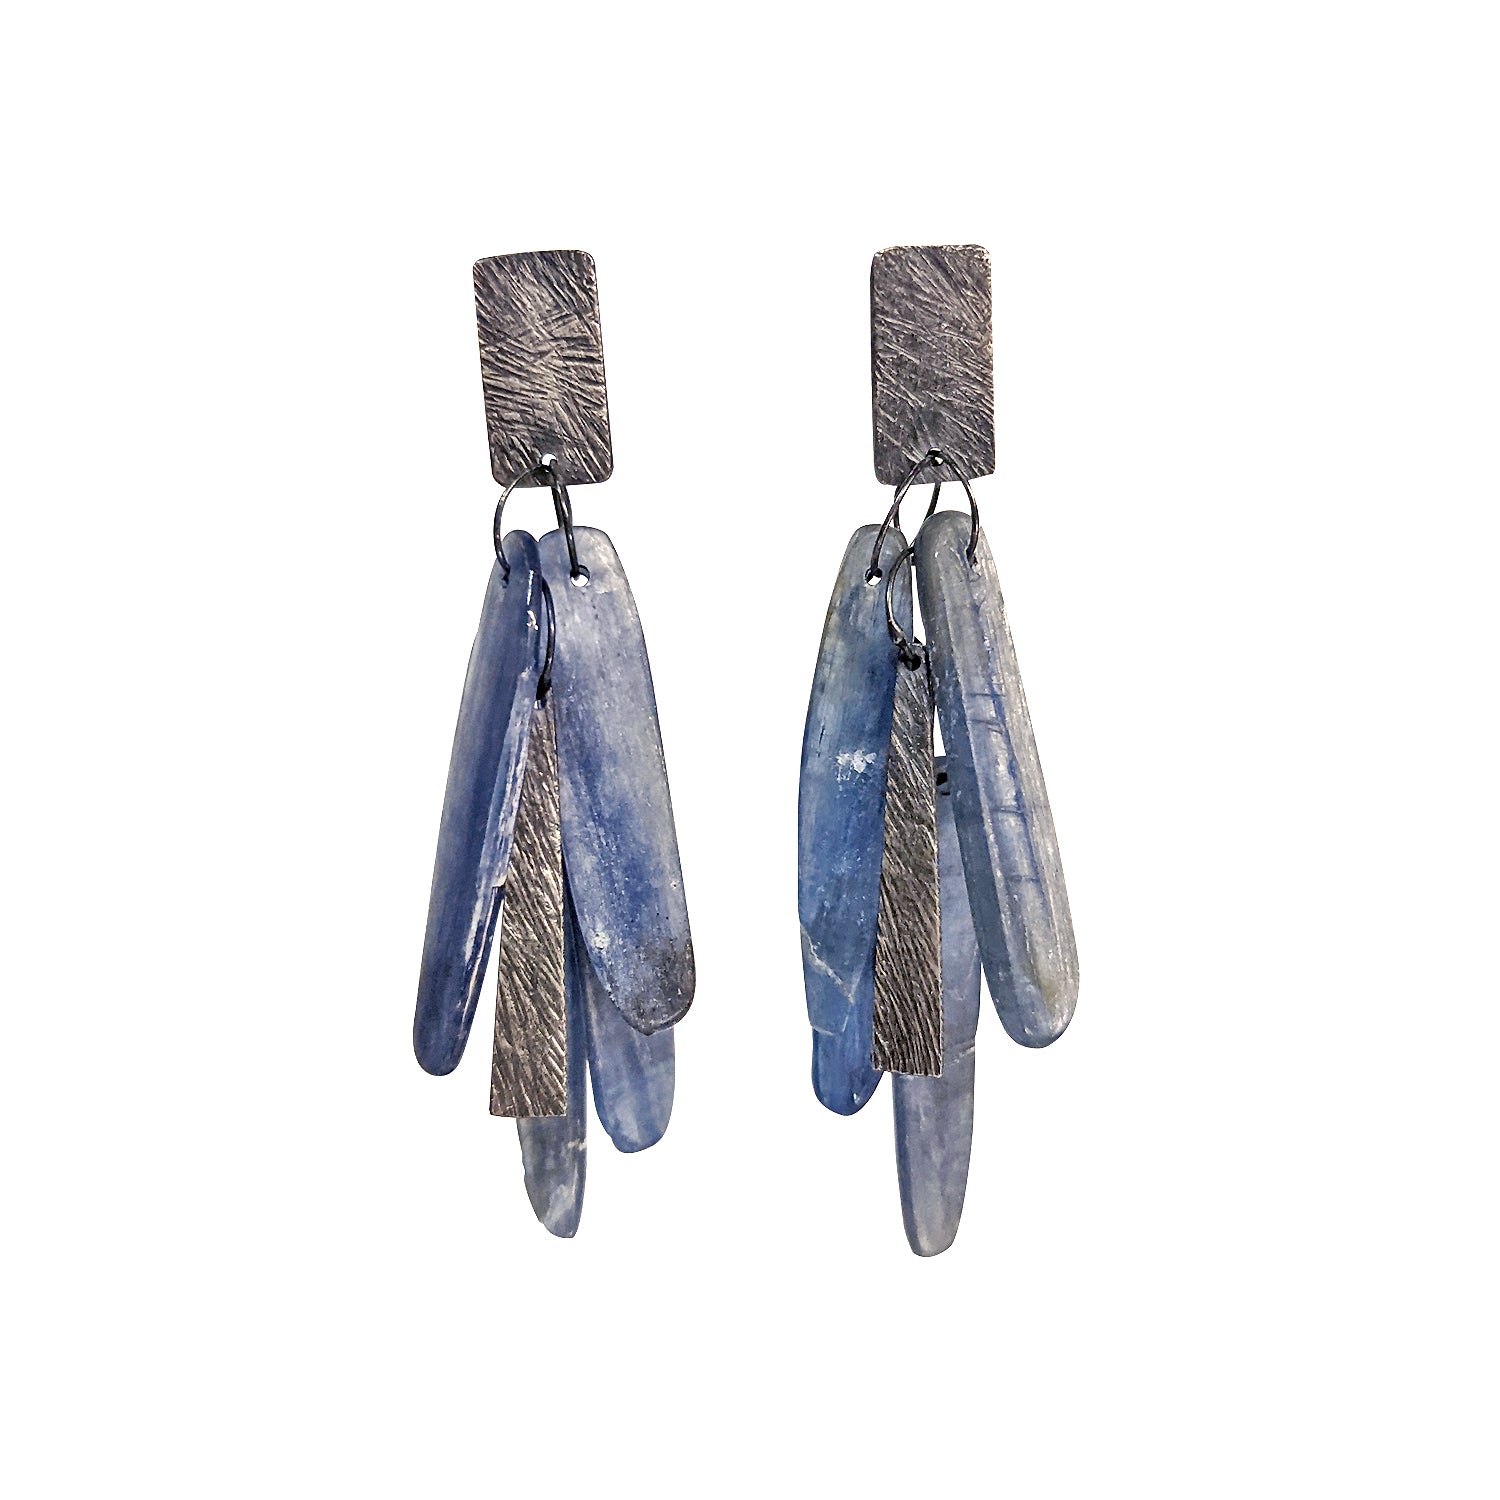 NEW! Delicate Tangle Kyanite Earrings by Heather Guidero